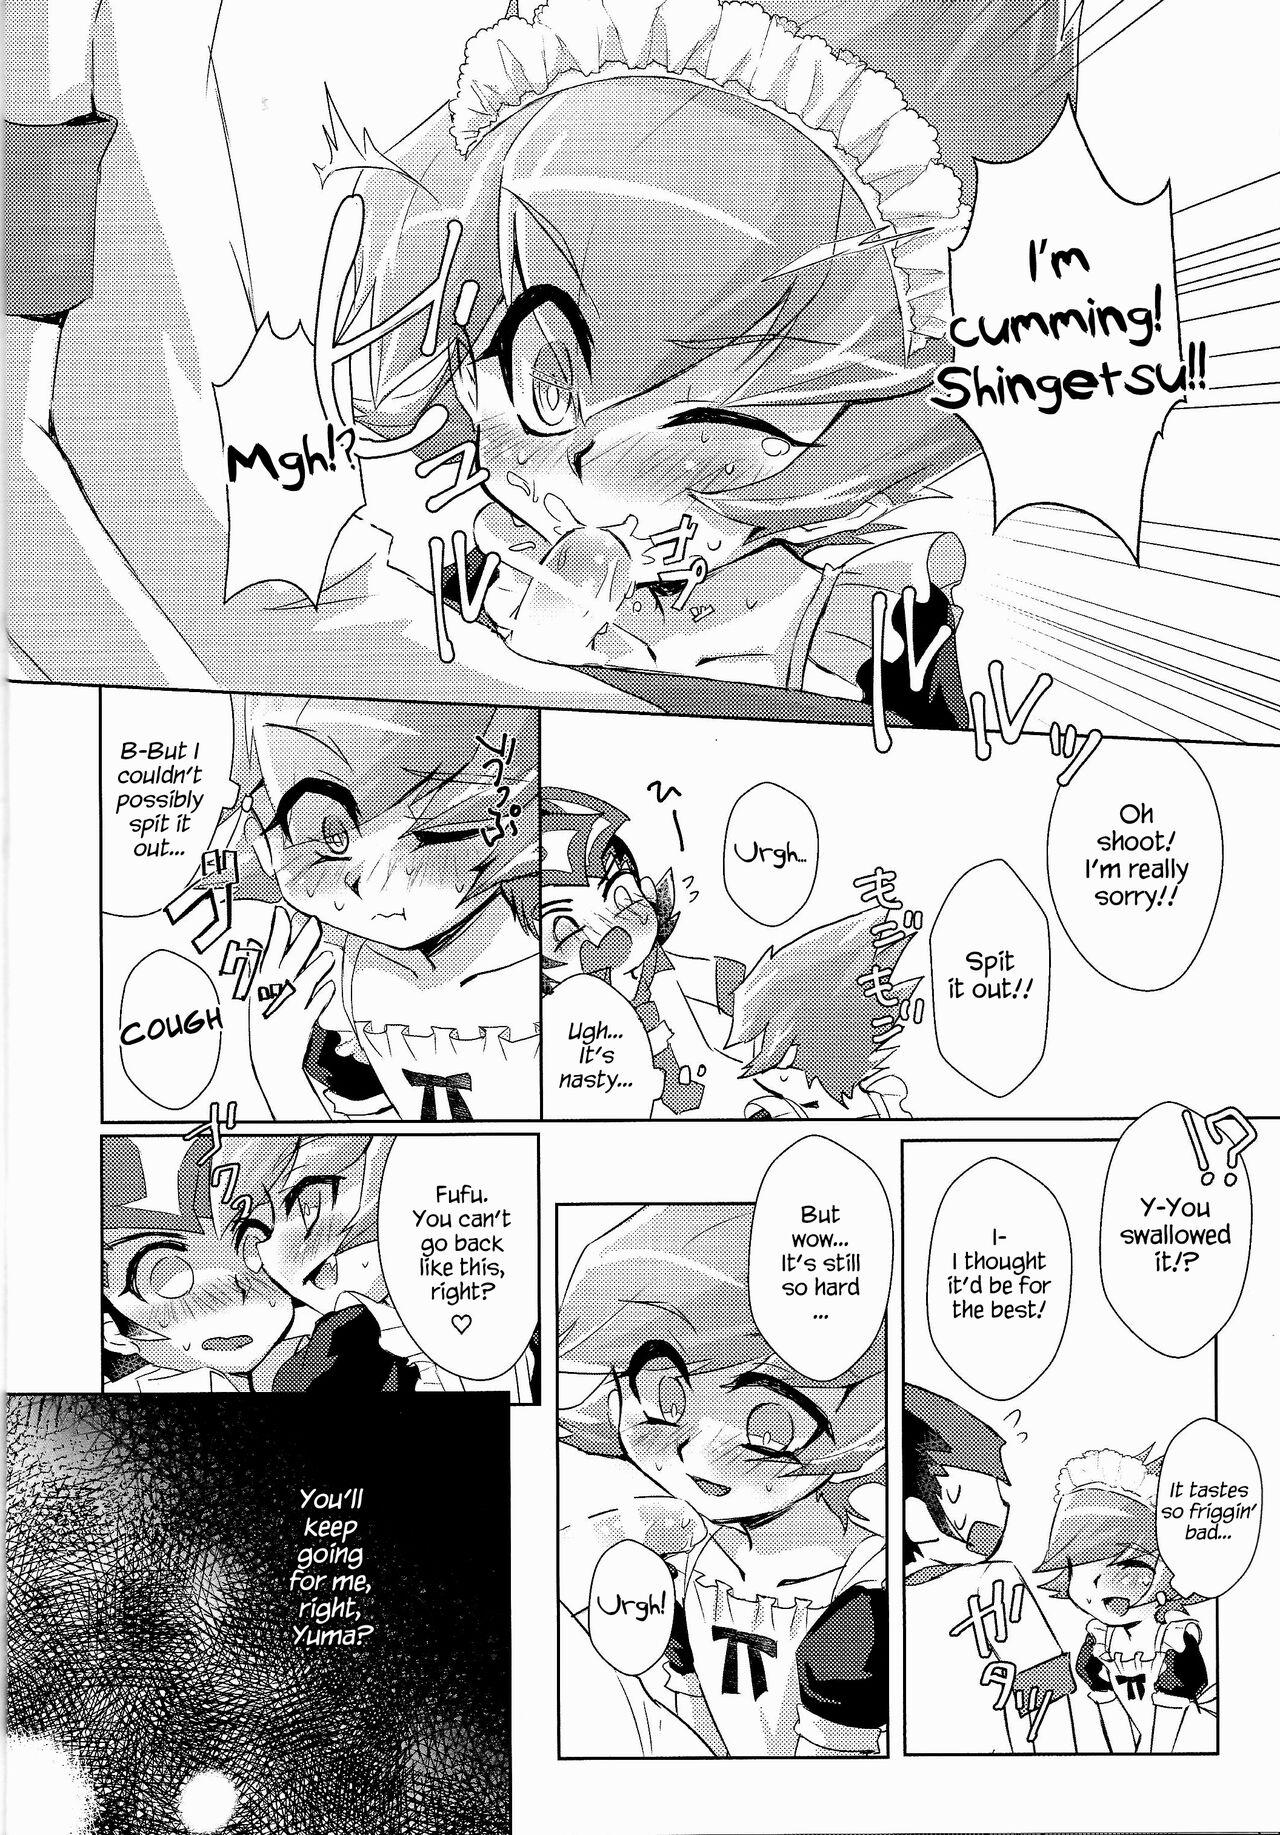 Mistress Stand by me - Yu gi oh zexal Slave - Page 11